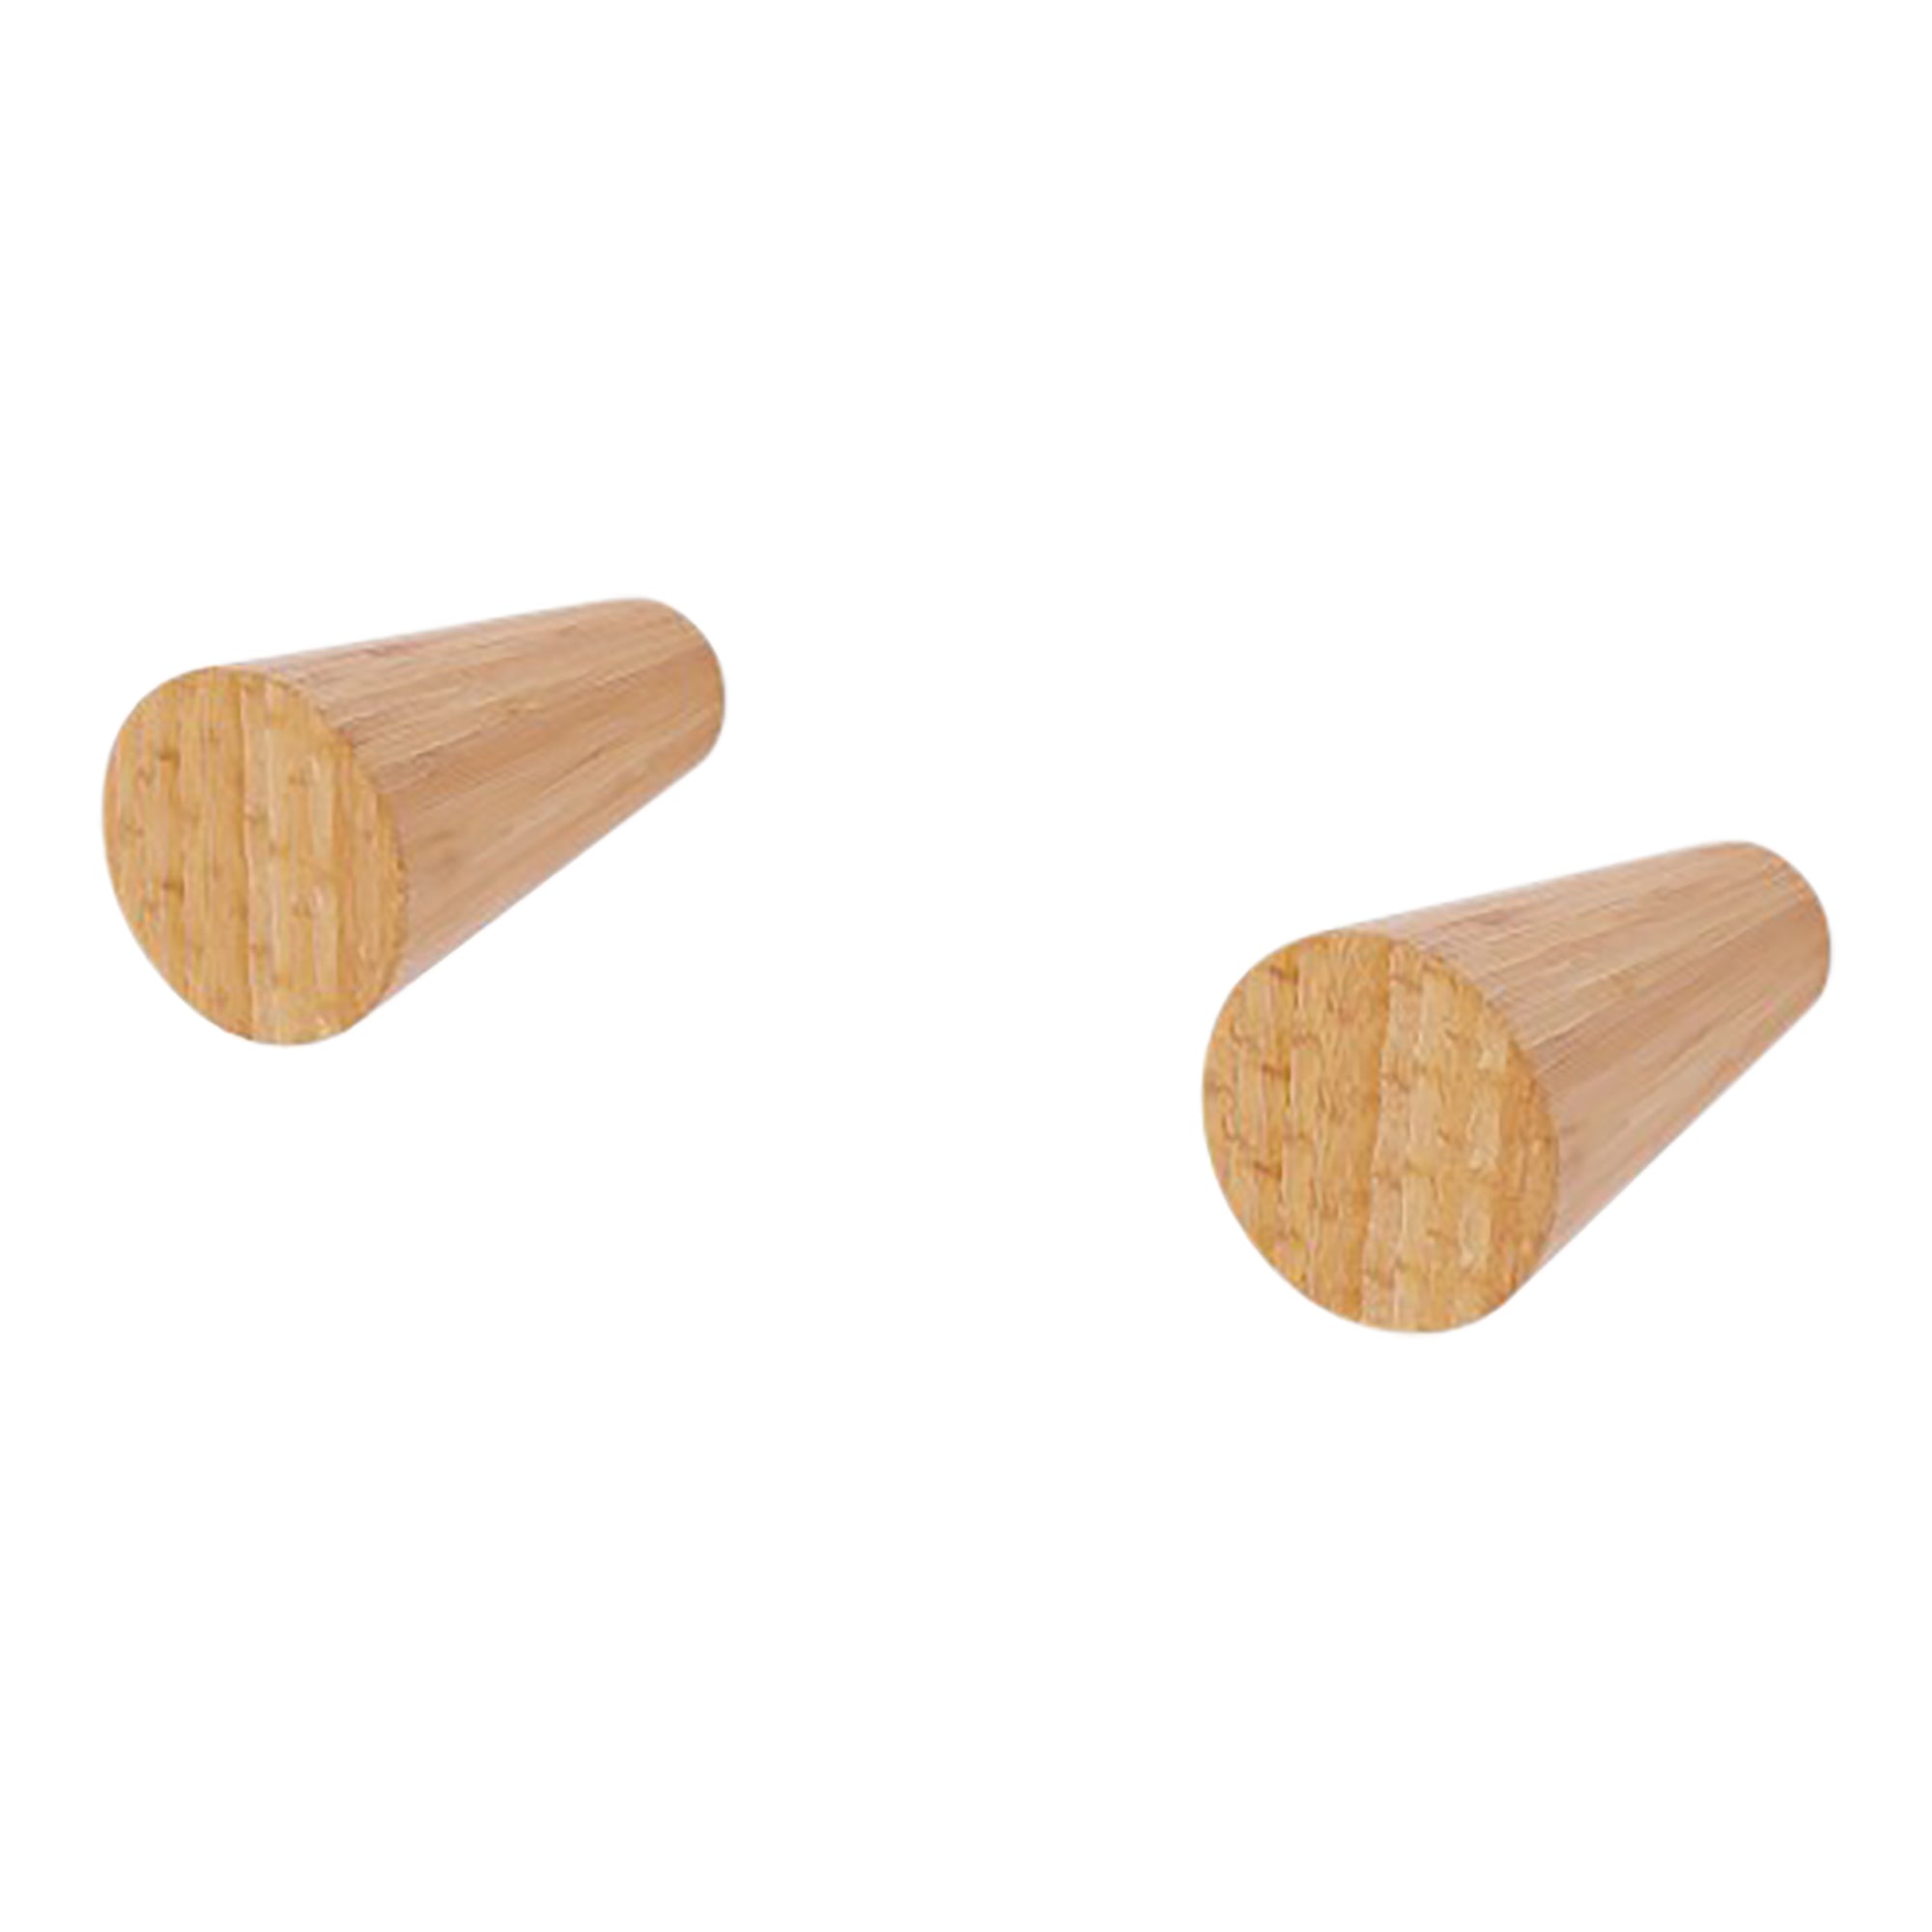 Hook pack of 2 - Bamboo